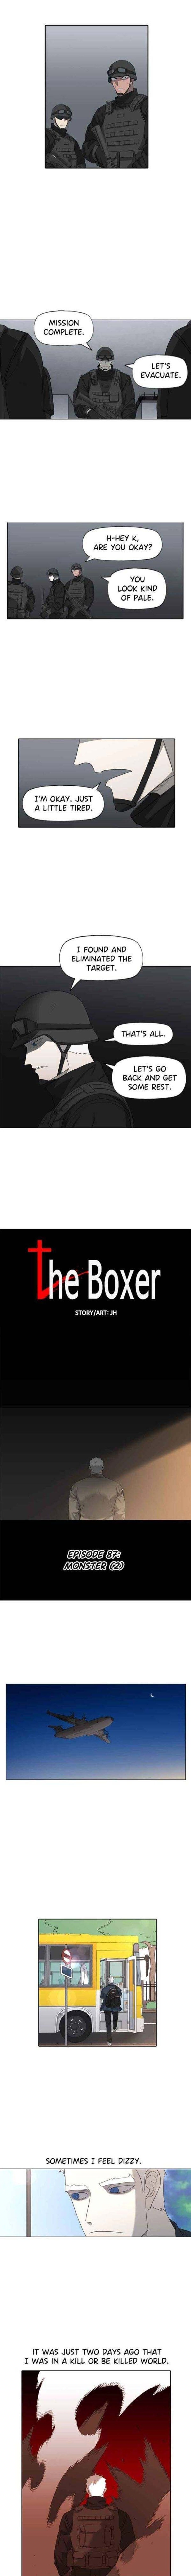 The Boxer 90 1